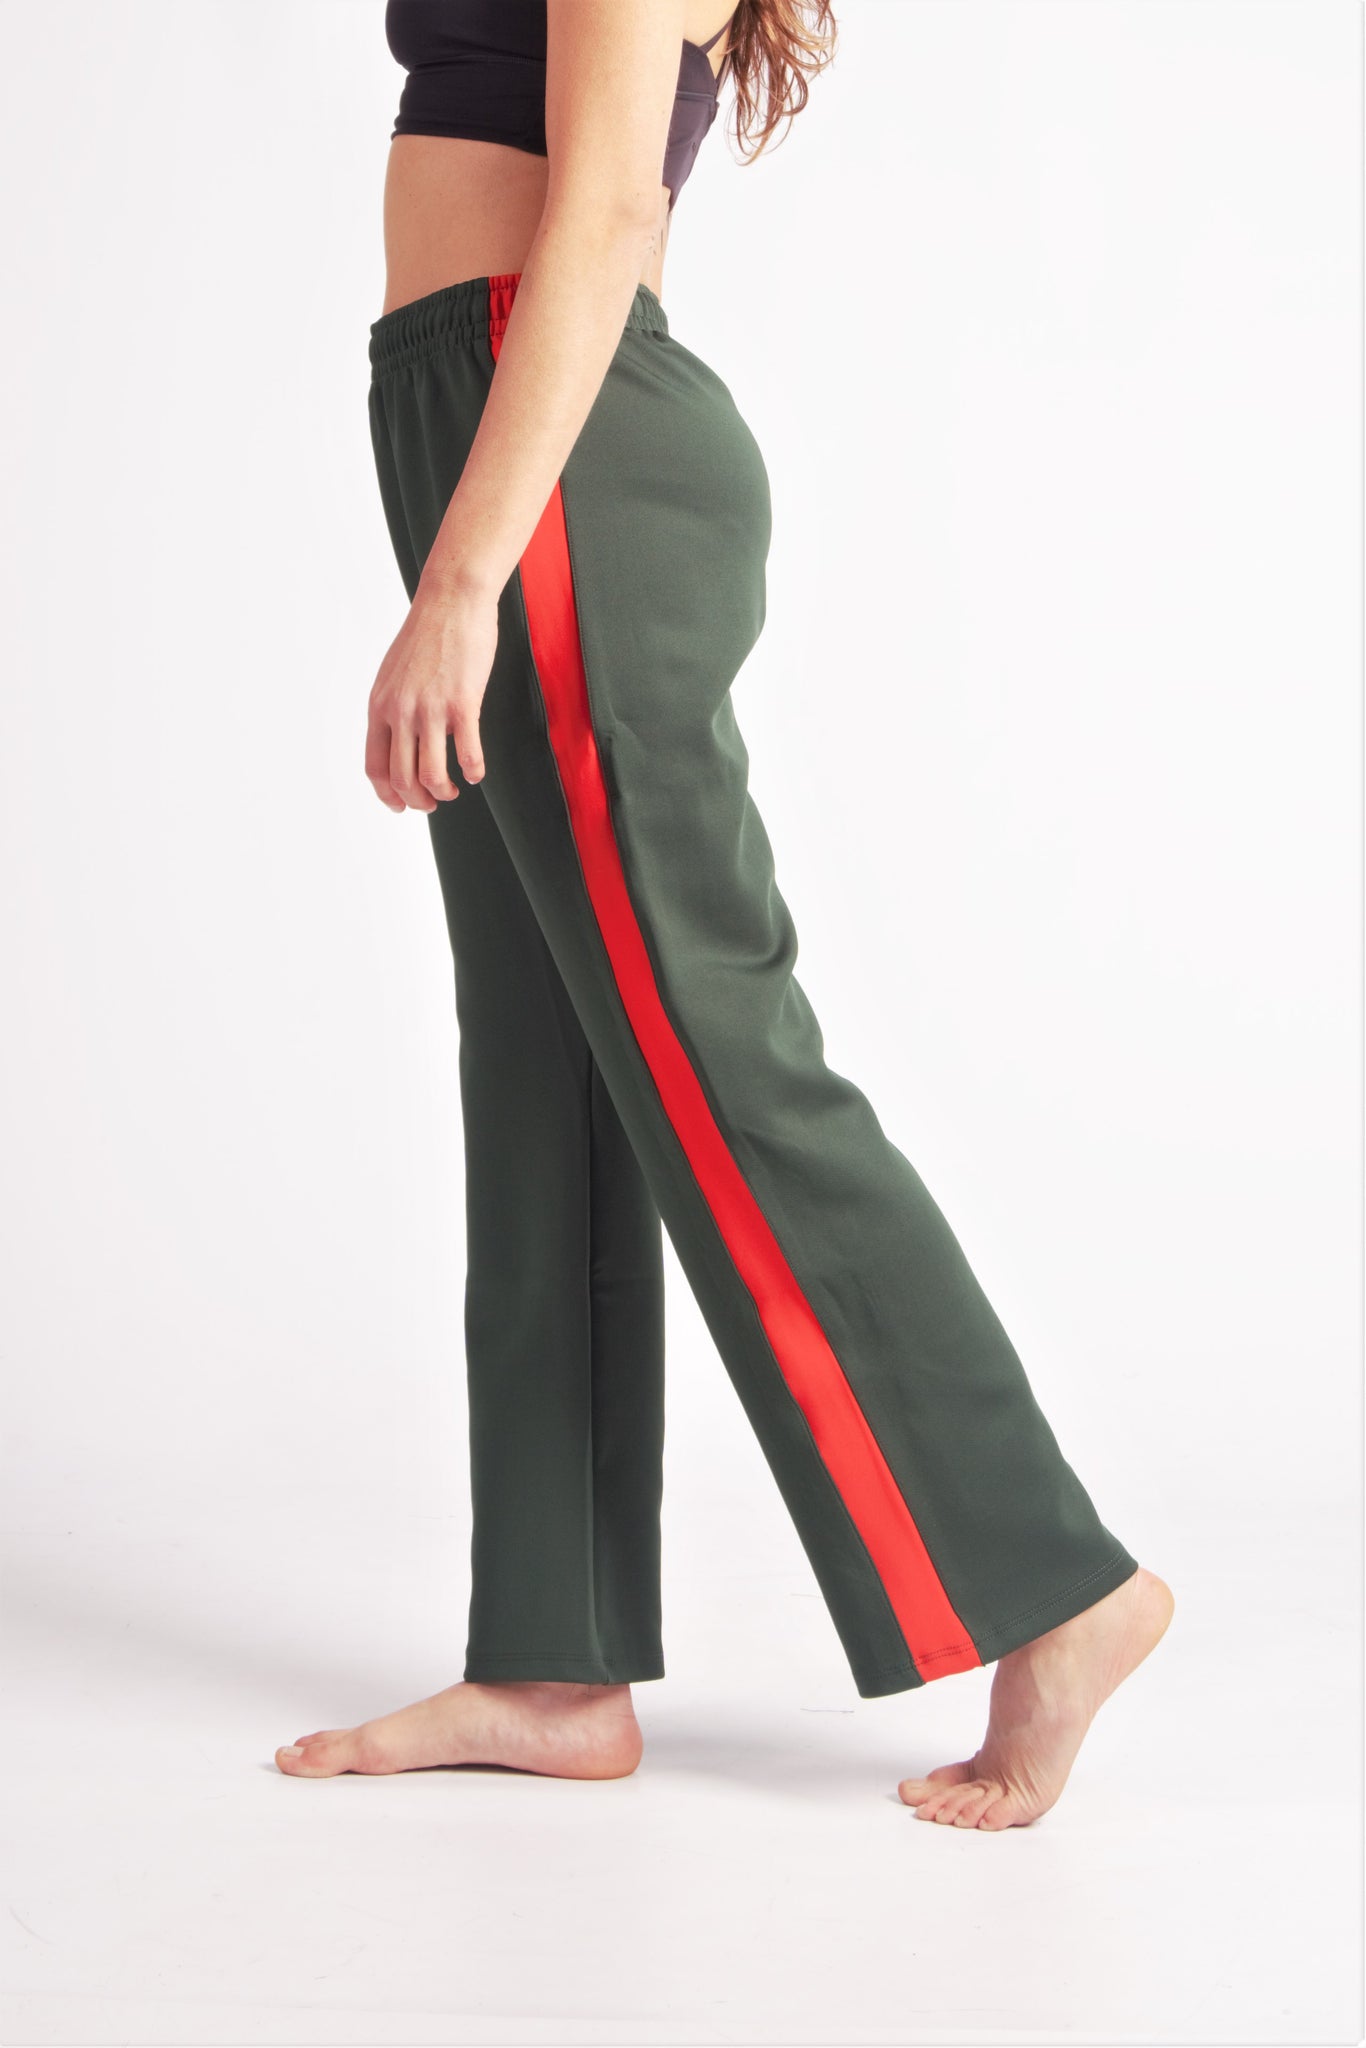 Flying Contemporary Dance Pants - Green & Red / EMotionBodiesBrand